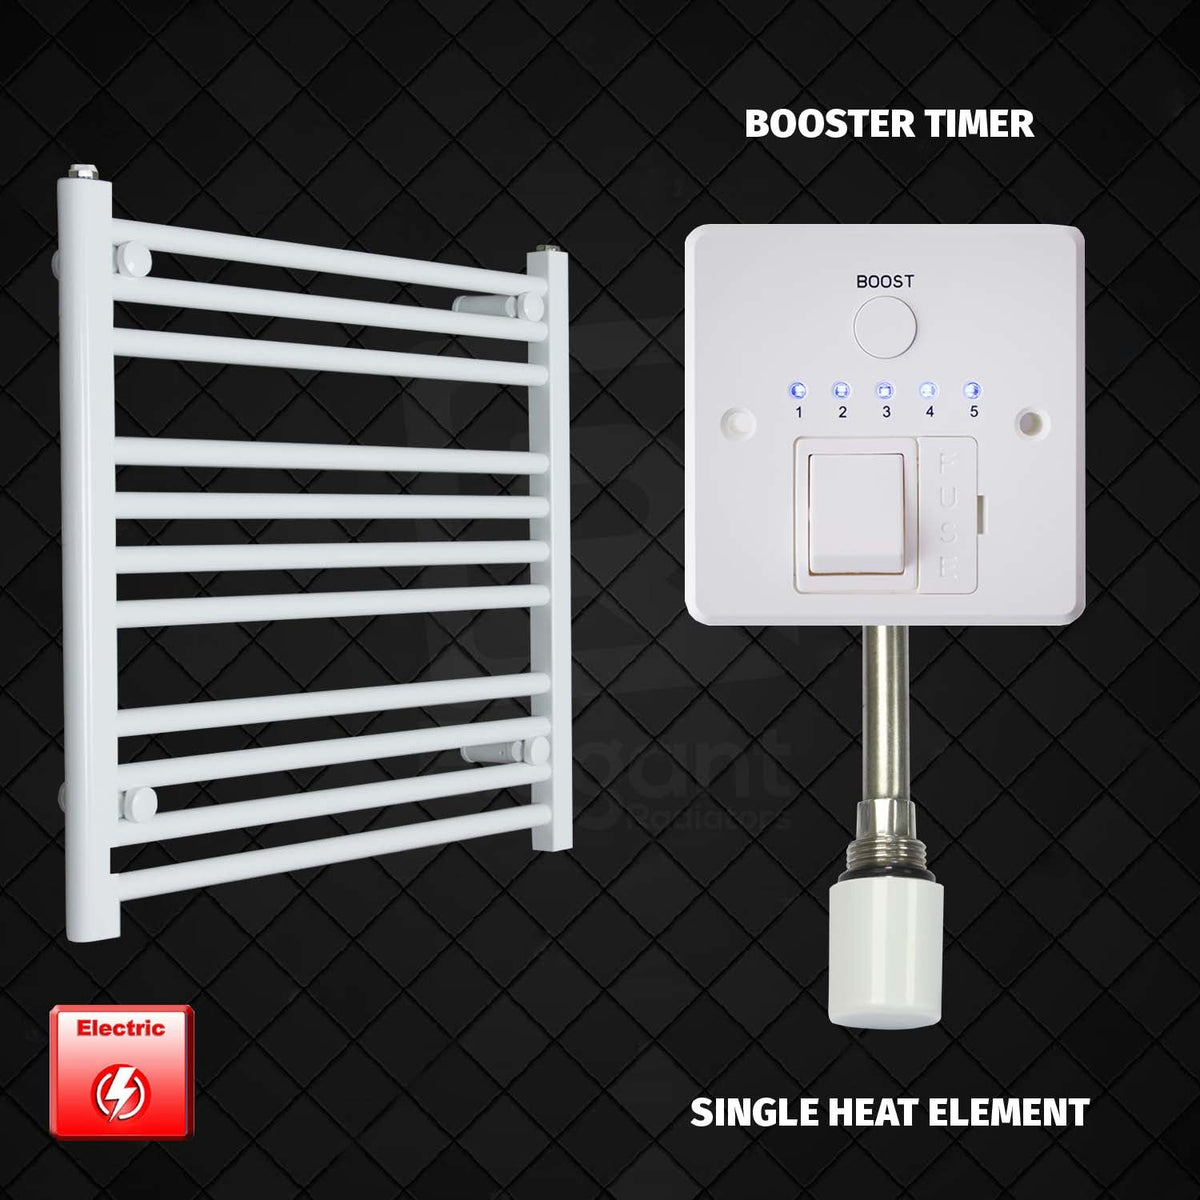 600 mm High 600 mm Wide Pre-Filled Electric Heated Towel Rail Radiator White HTR Single heat element Booster timer